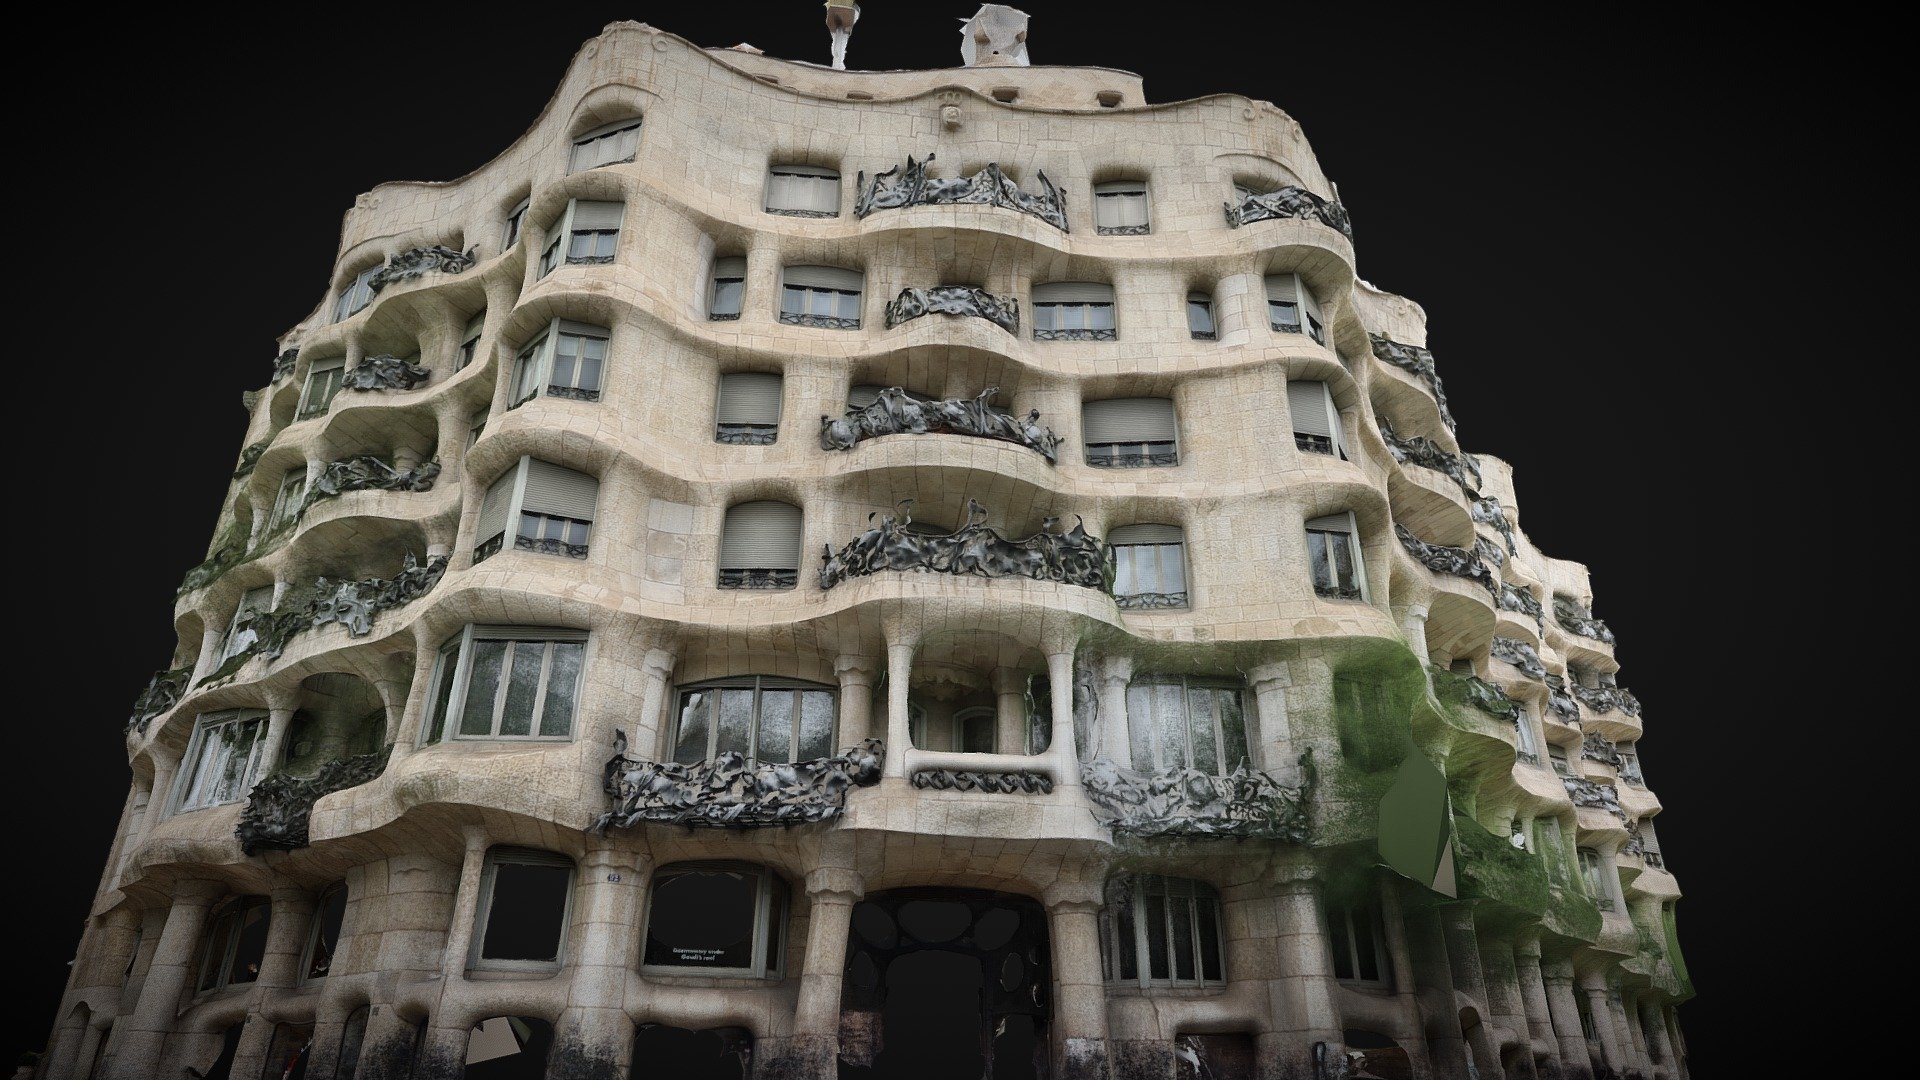 3D Scan &amp; modelling process using digital photogrammetry, by Thomas Axel Leclair.

&ldquo;The Casa Milà (La Pedrera) is considered Antoni Gaudí's most emblematic civil building, for its constructive and functional innovations and for the ornamental and decorative solutions that break with the architectural styles of his time.

The façade of La Pedrera is not structural, it loses its traditional function as a load-bearing wall and becomes a curtain wall. The stone blocks (more than 6,000) are joined to the structure by metal elements, which is why large windows could be opened.